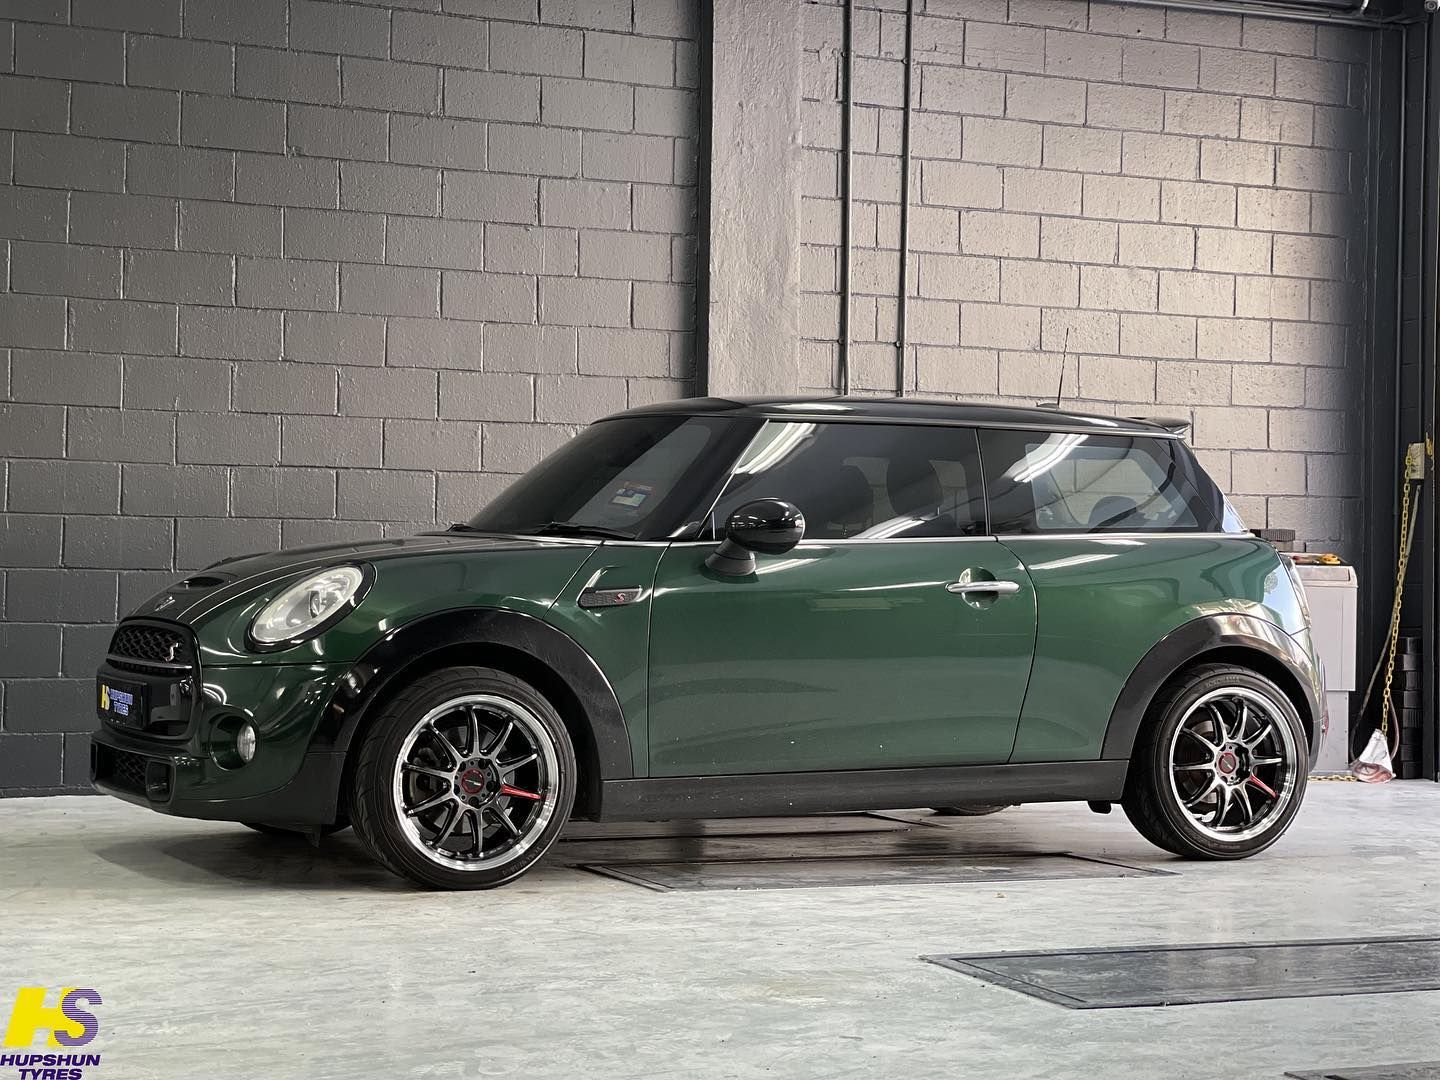 Mini Cooper S with 17-inch Work Emotion ZR10